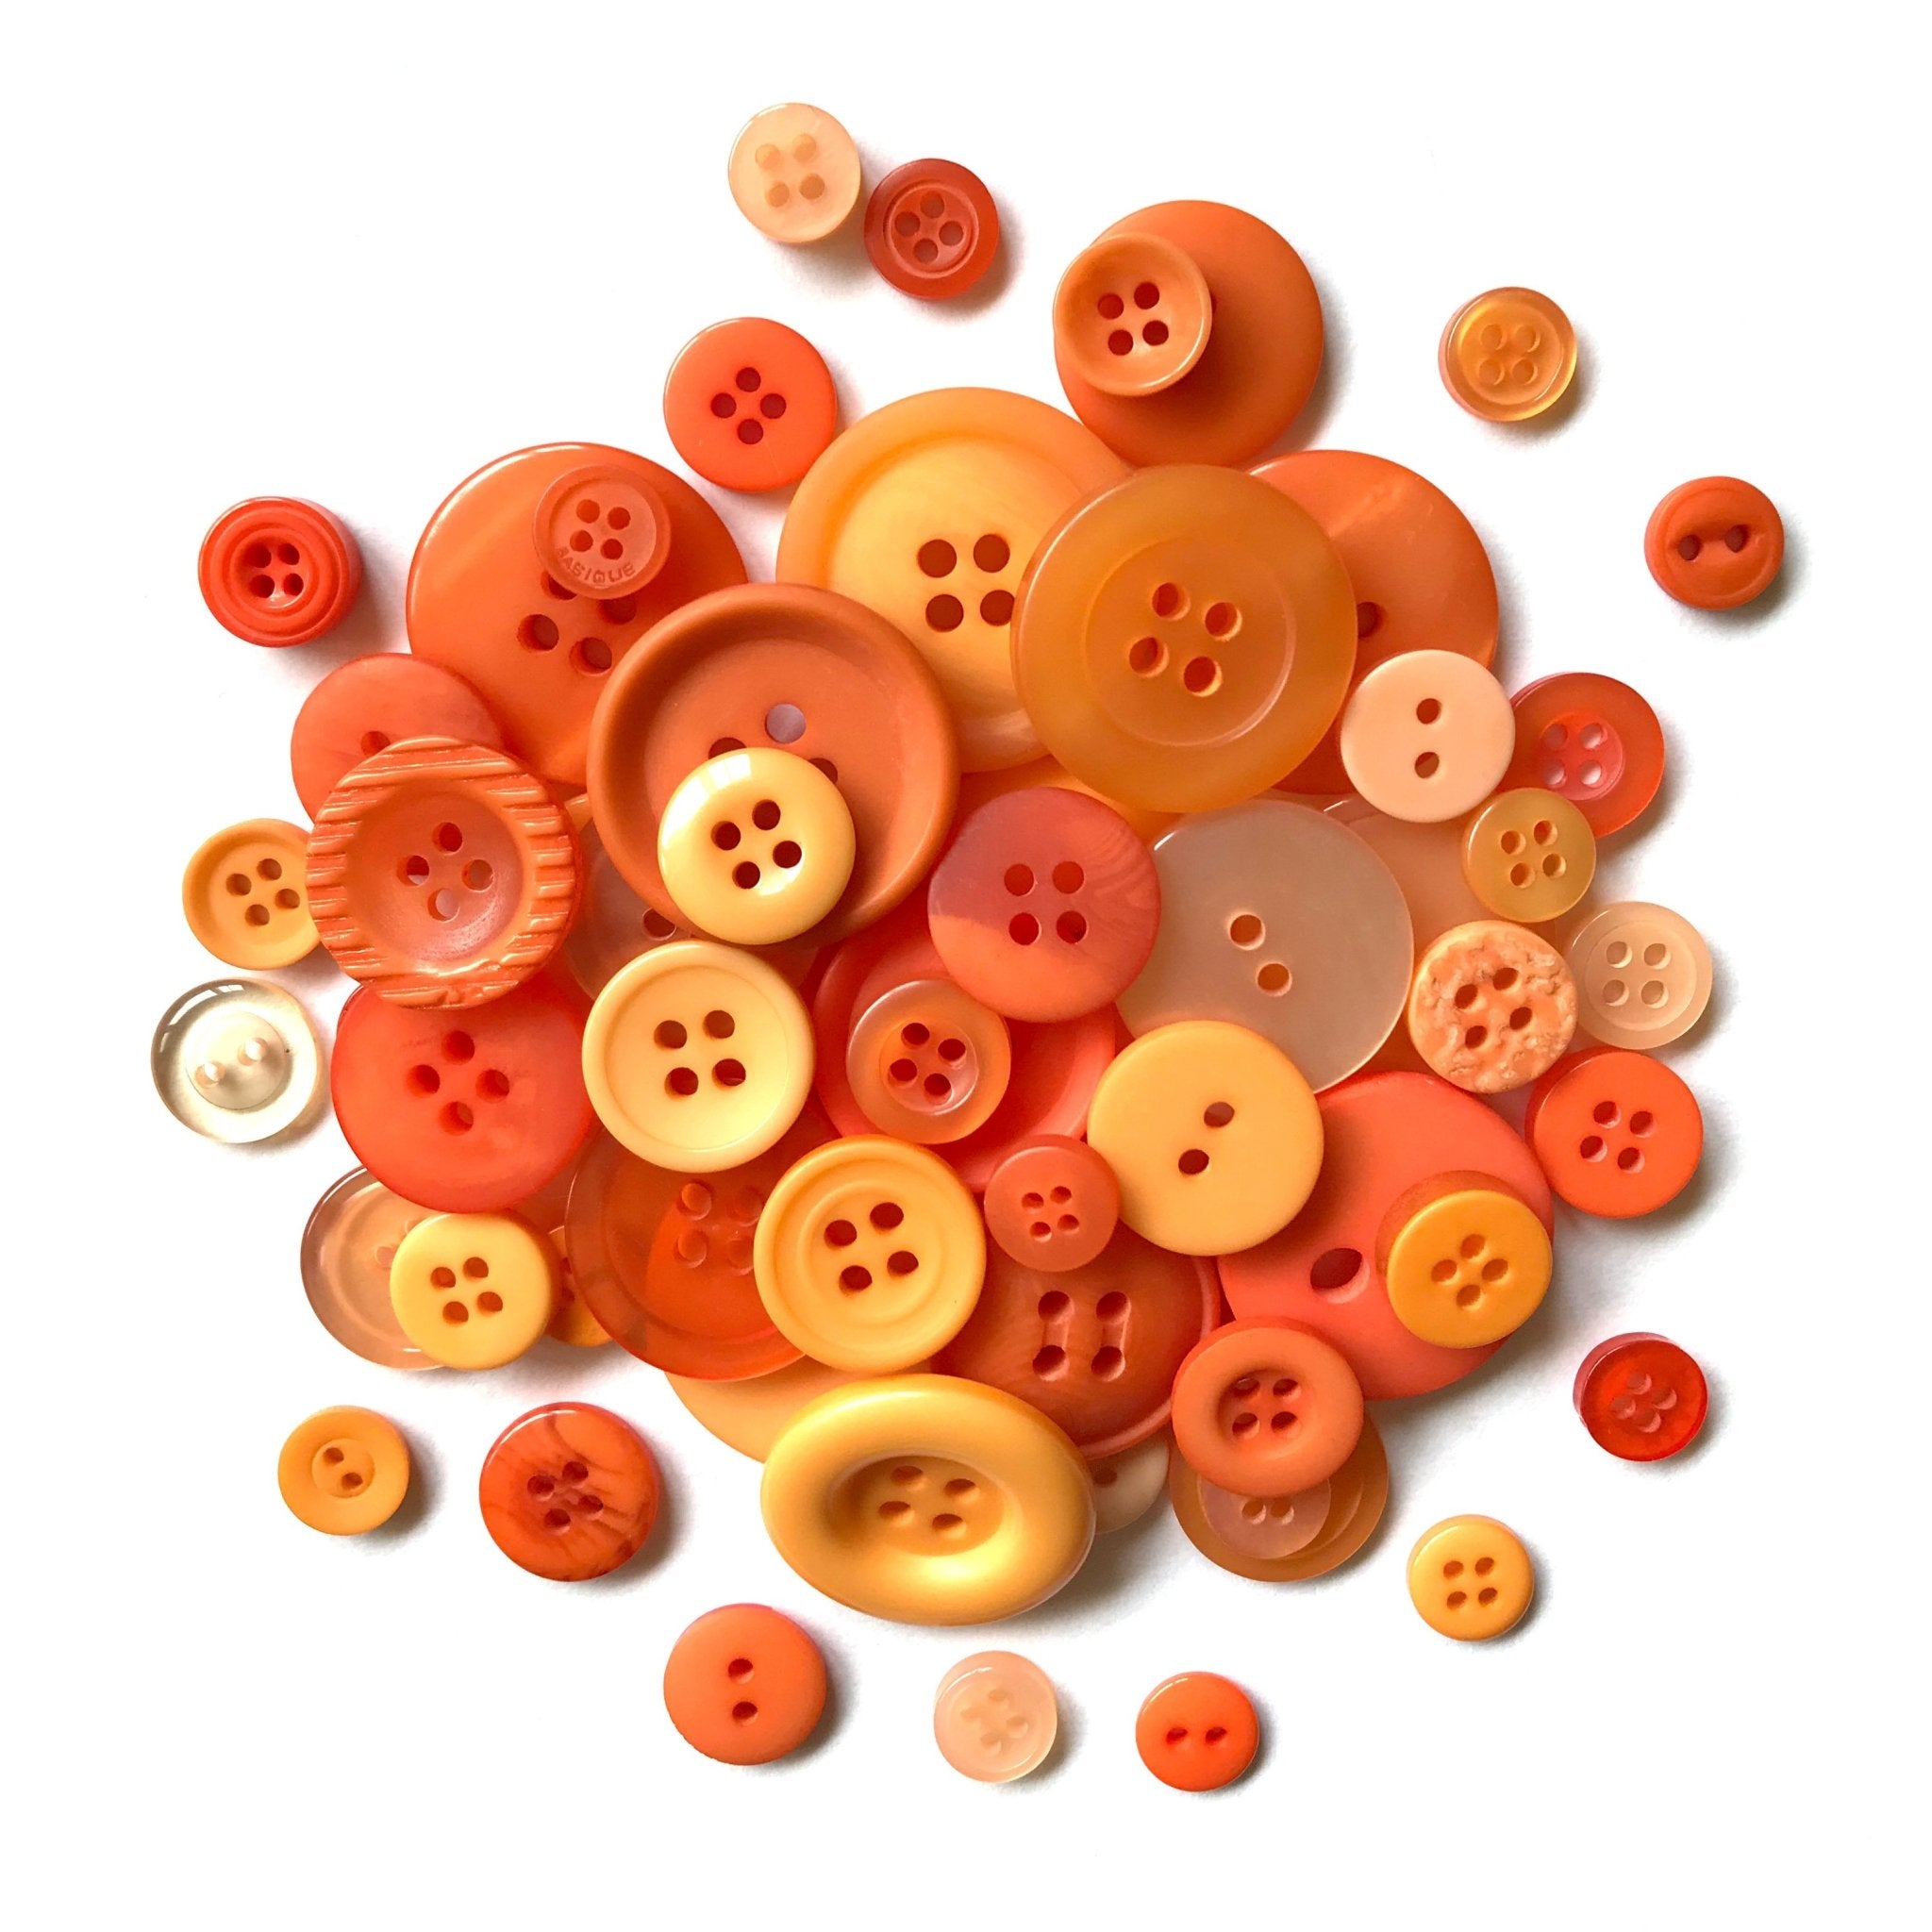 Ganquer 1000 Pcs Buttons for Crafts, Colorful Buttons, Mixed Sizes